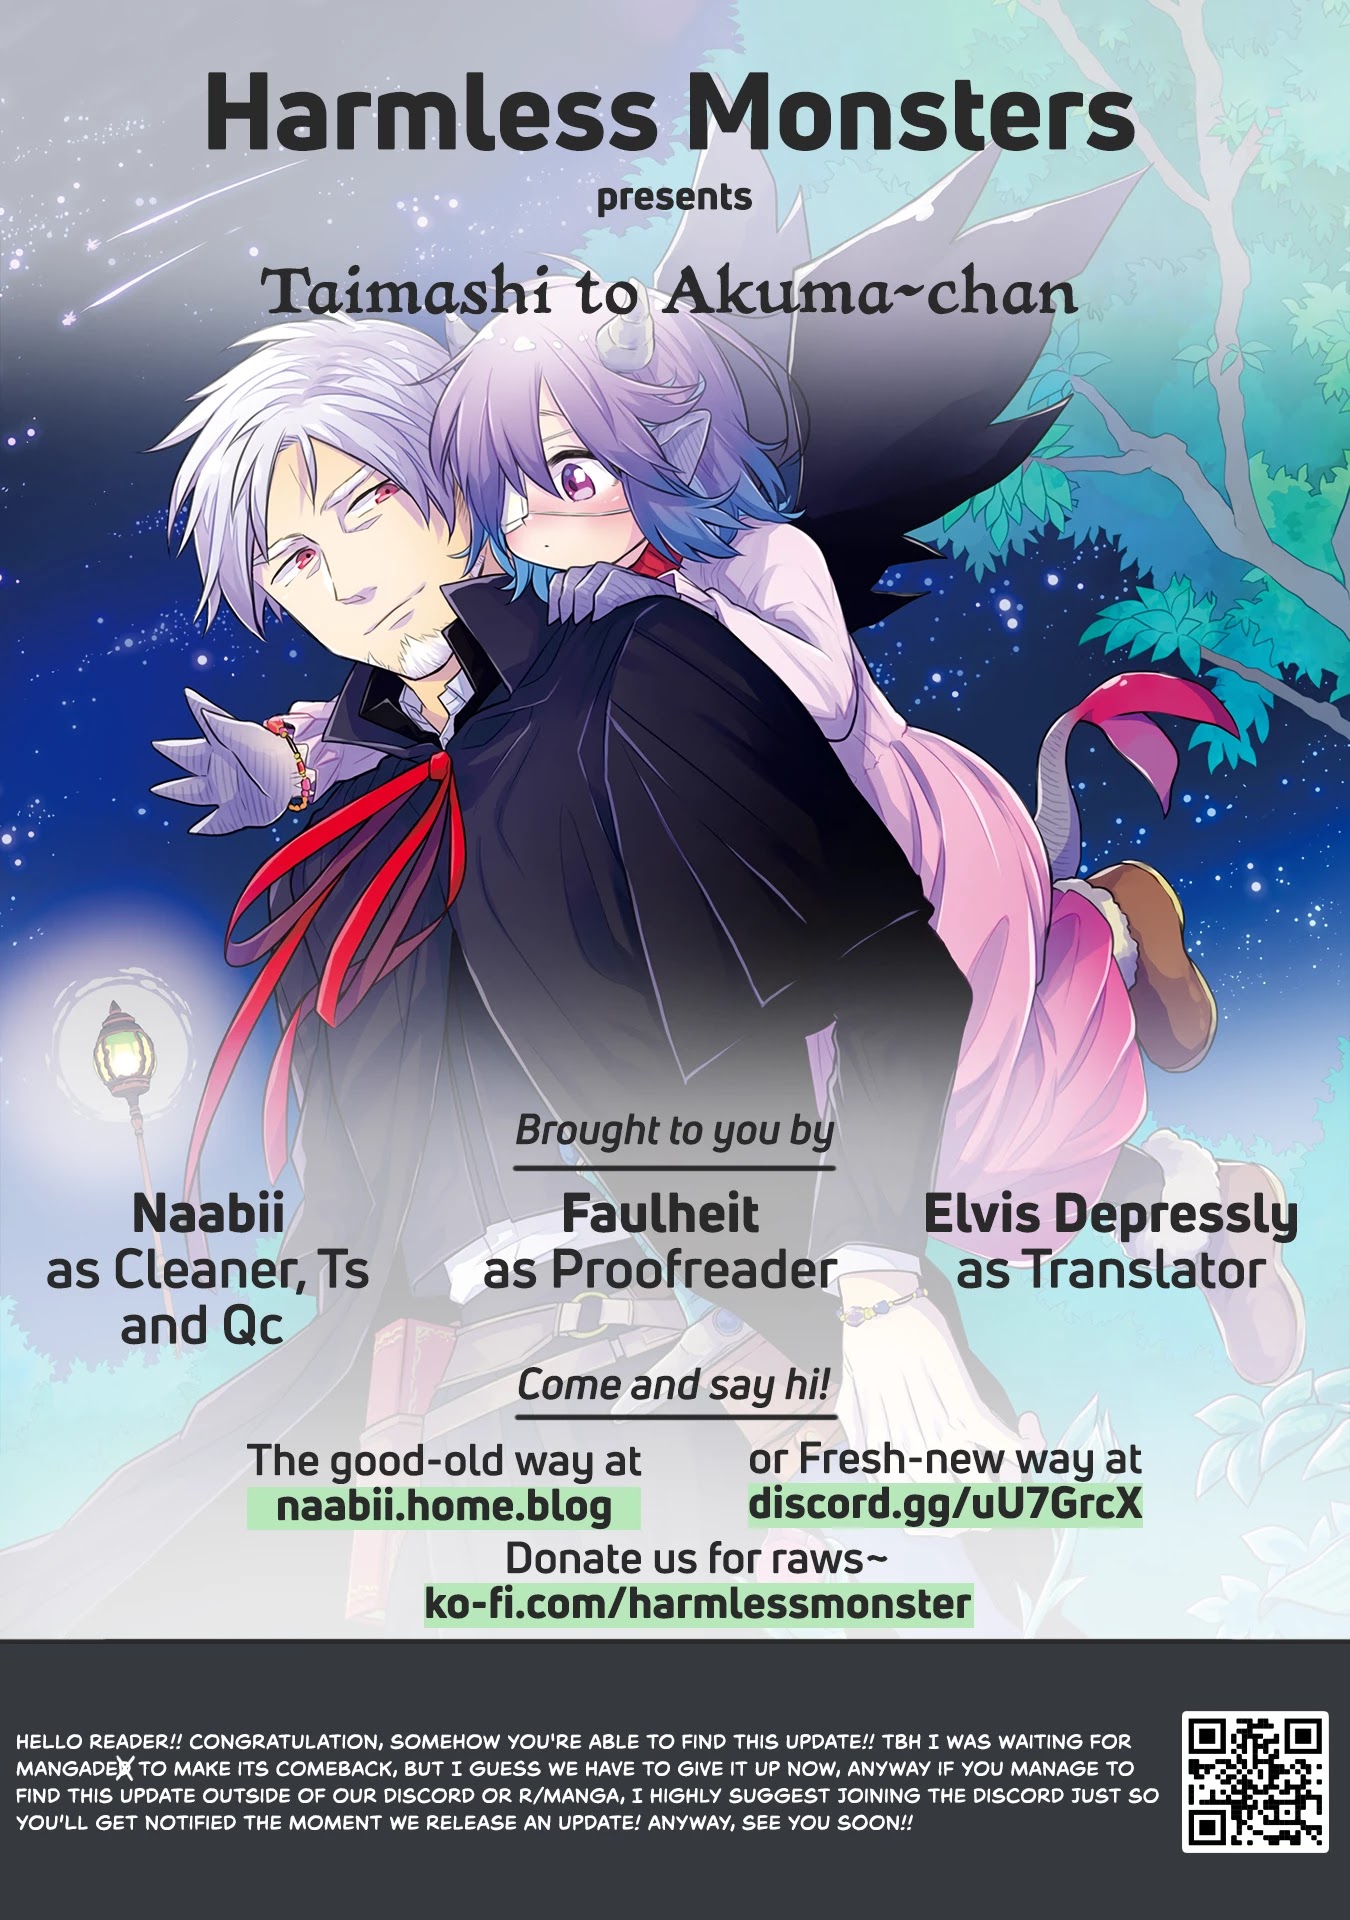 Exorcist And Devil-Chan Chapter 39